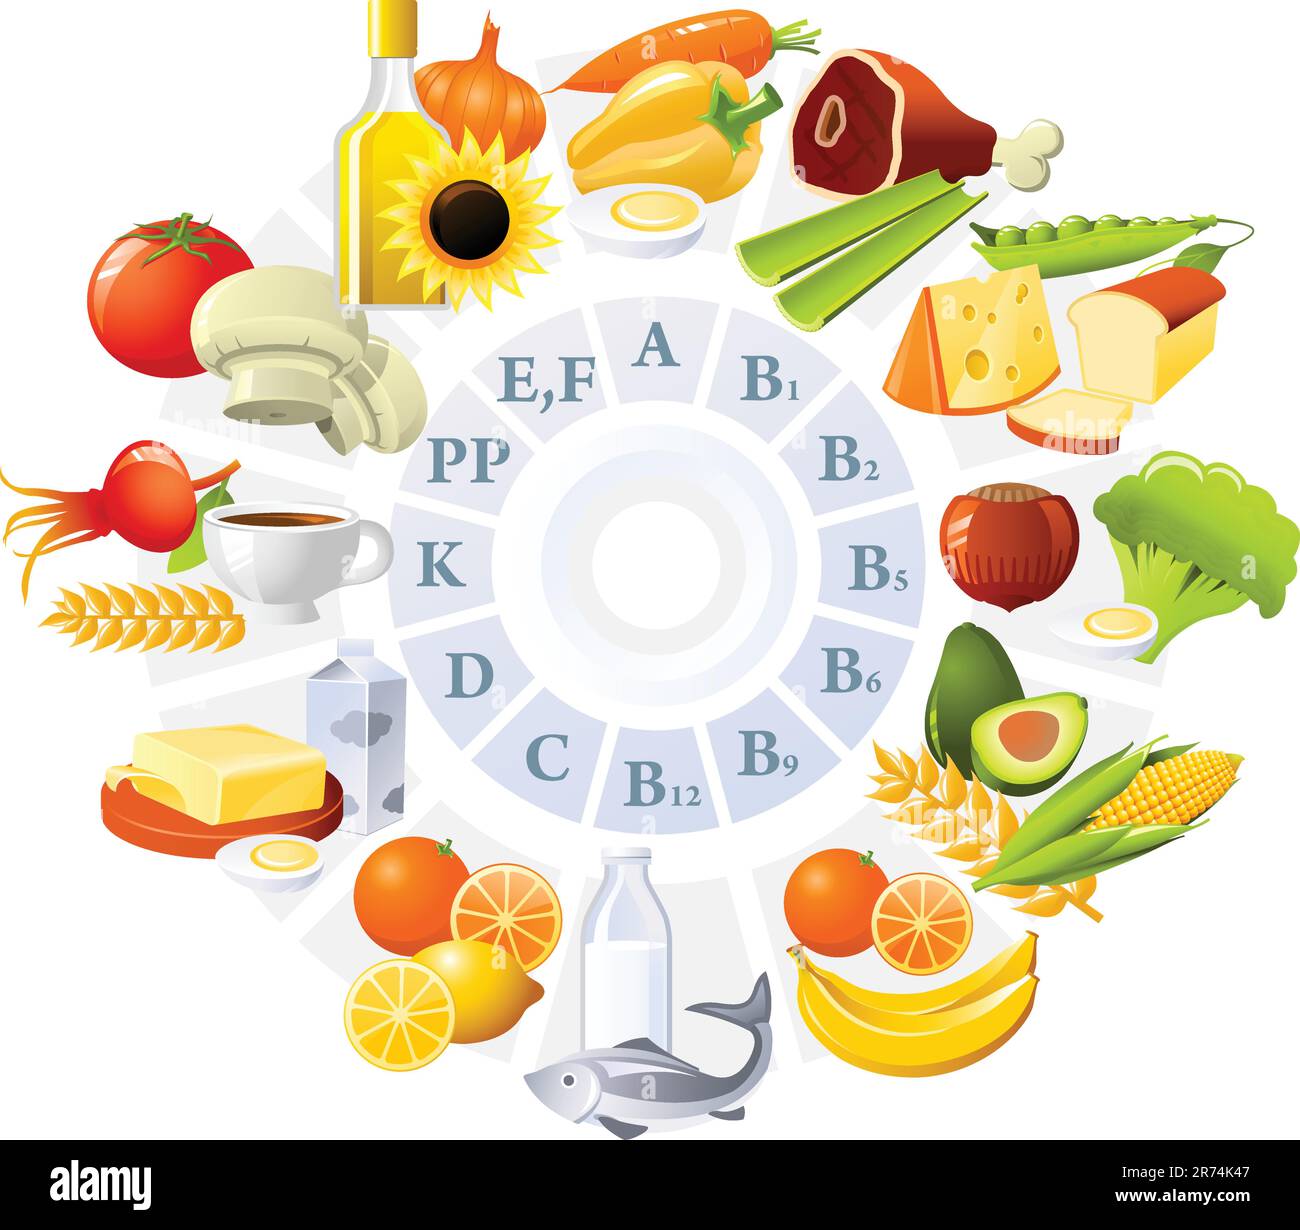 Table of vitamins - set of food icons organized by content of vitamins Stock Vector